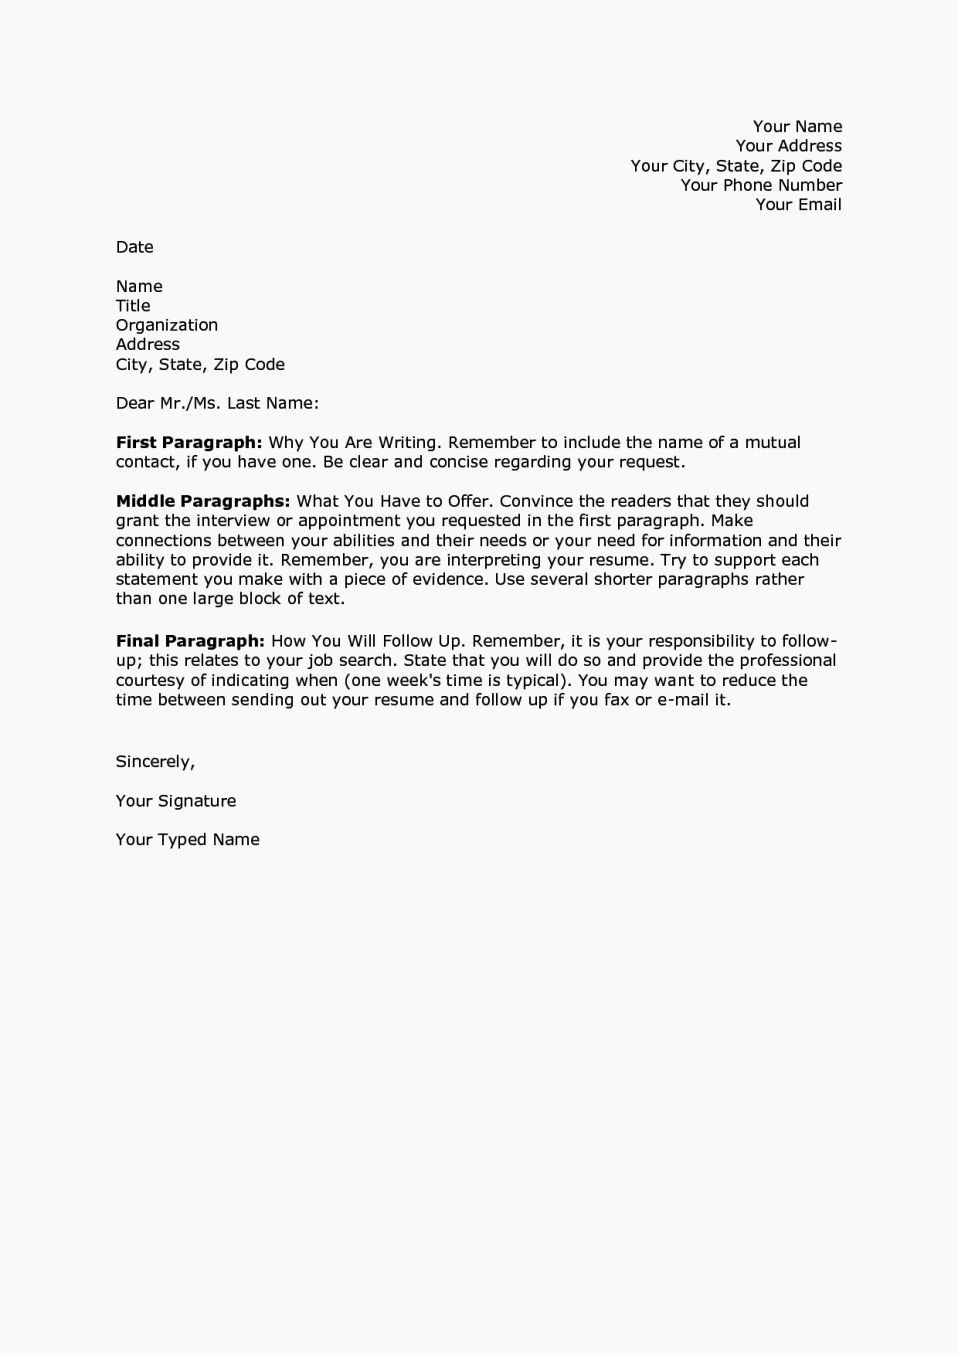 How to Cover Letter Template Beautiful Cover Letter Sample Doc Resume Template